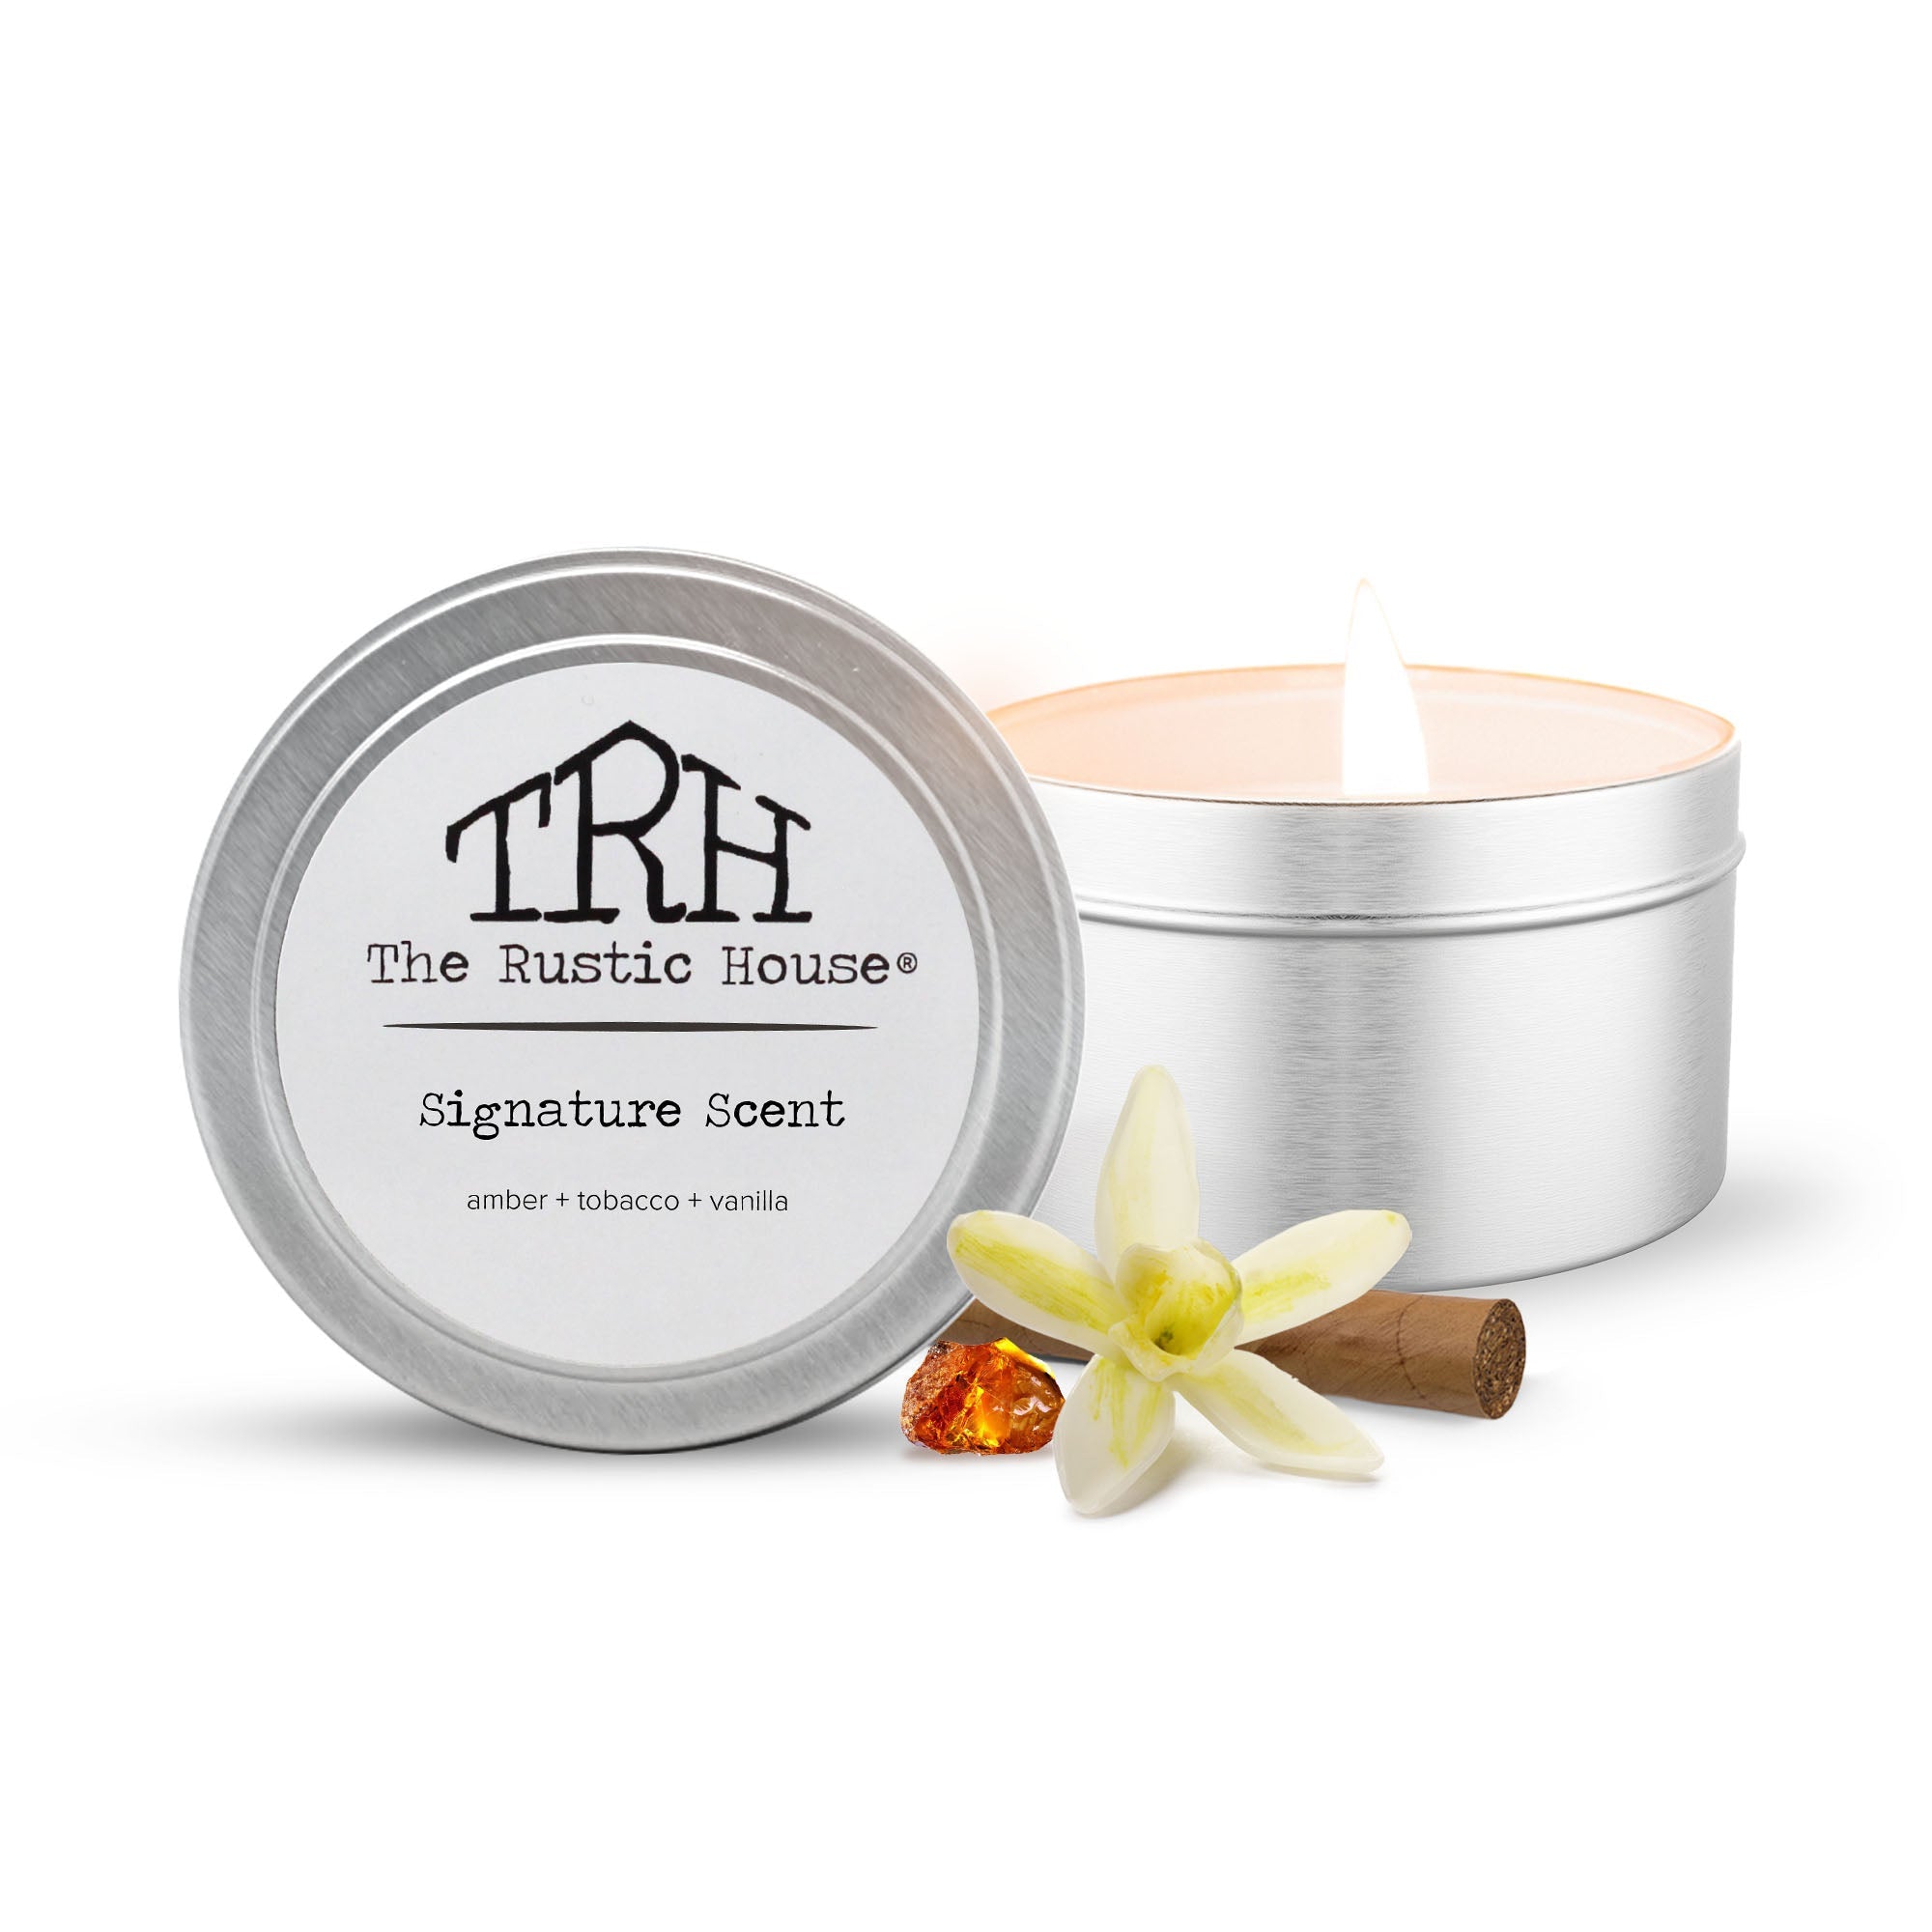 Signature Scent Travel Tin Candle | The Rustic House